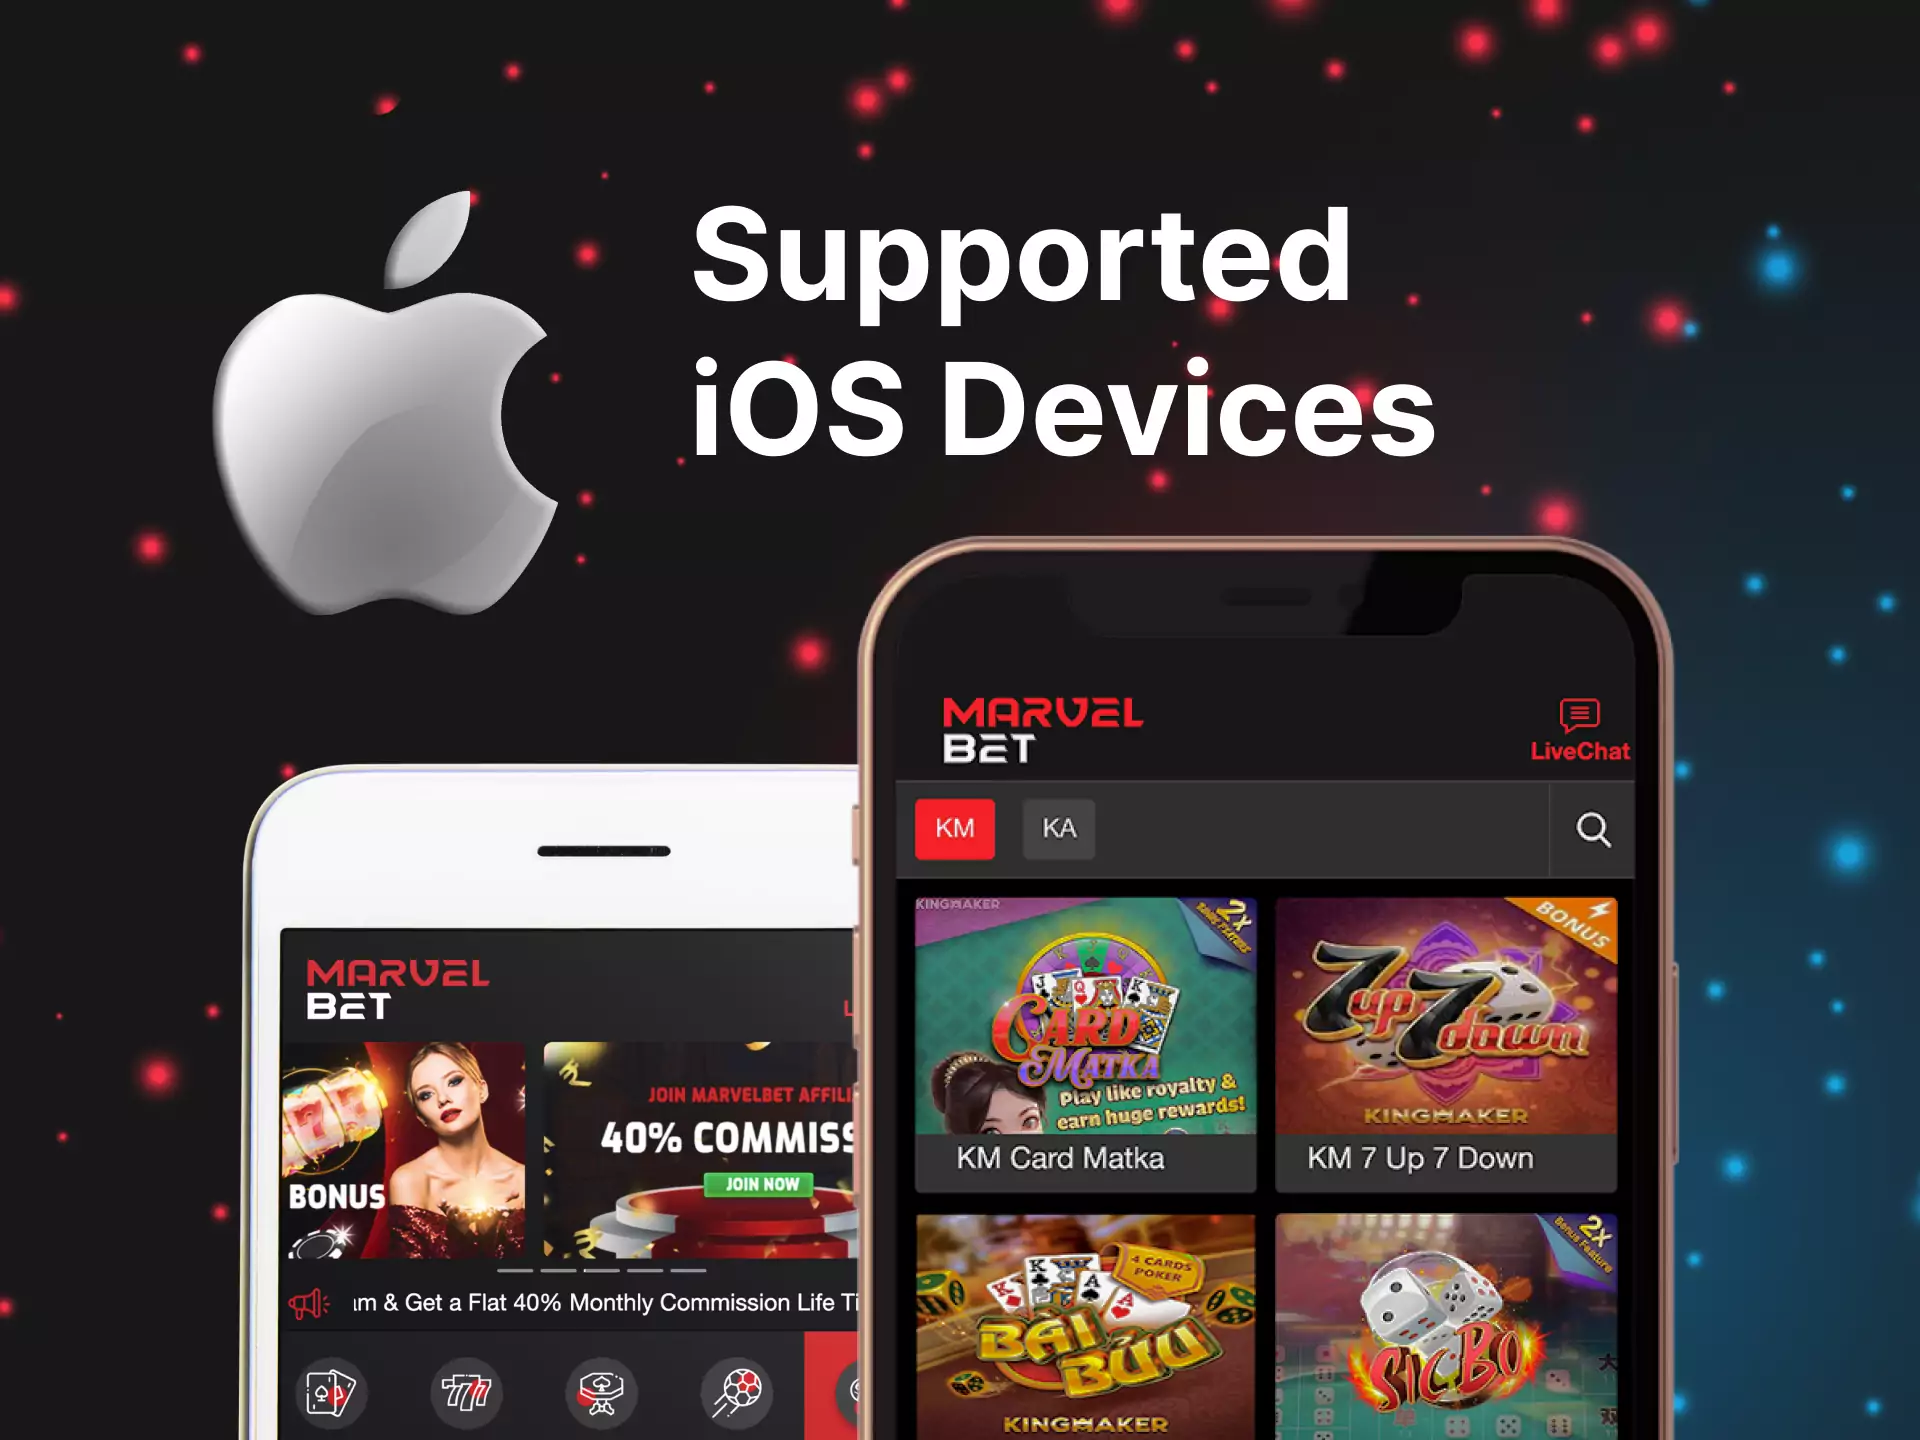 You can place bets and play casino games on any iOS device.